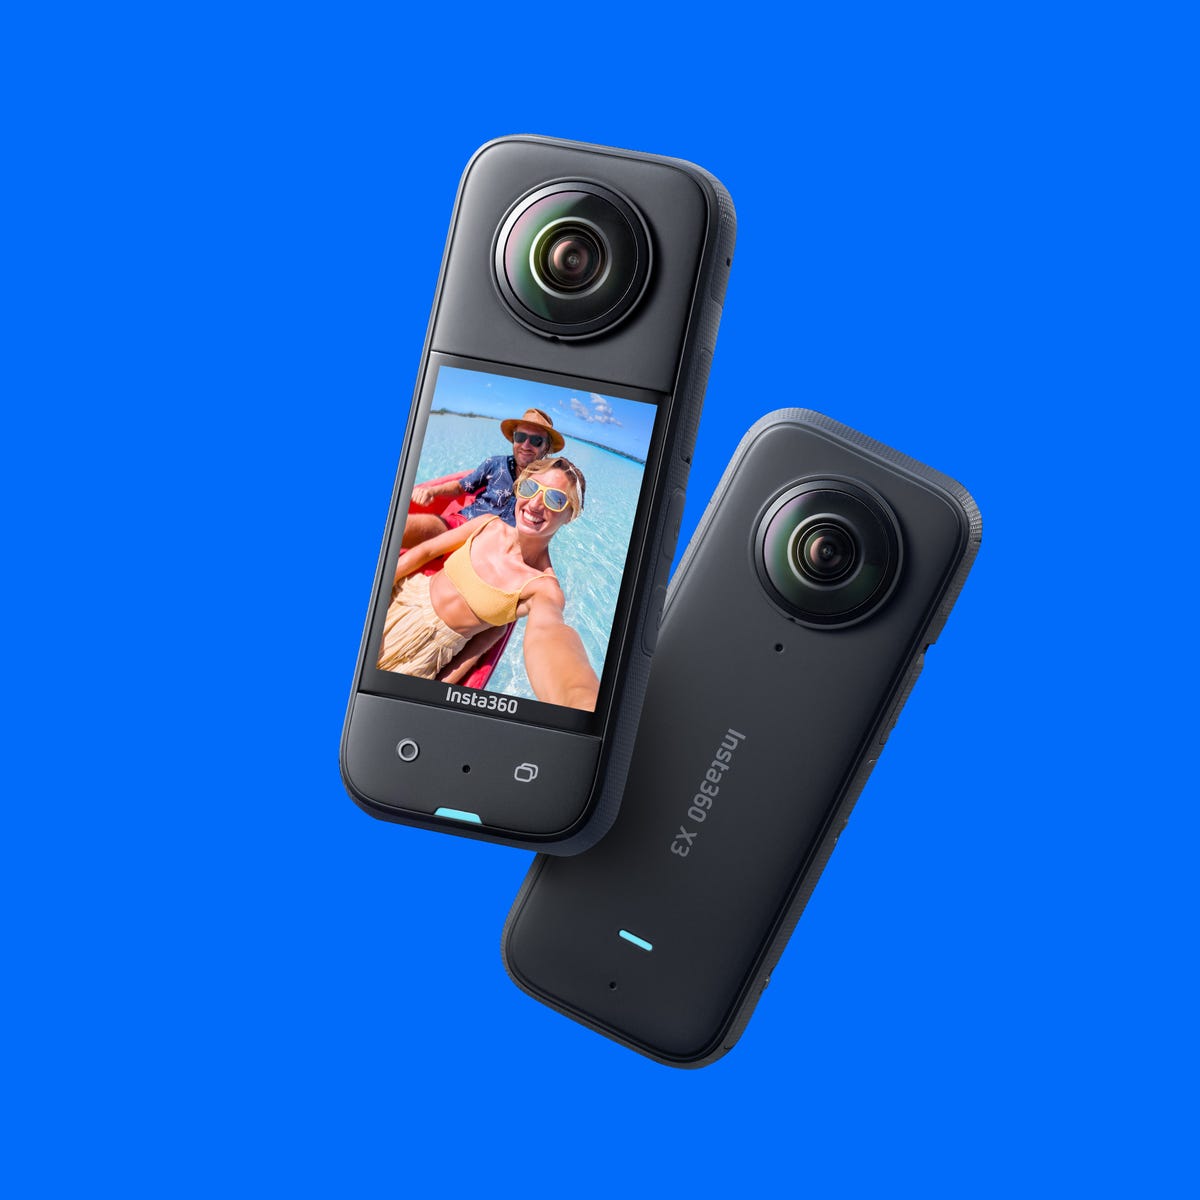 Insta360's X3 360-degree action cam will blow you away